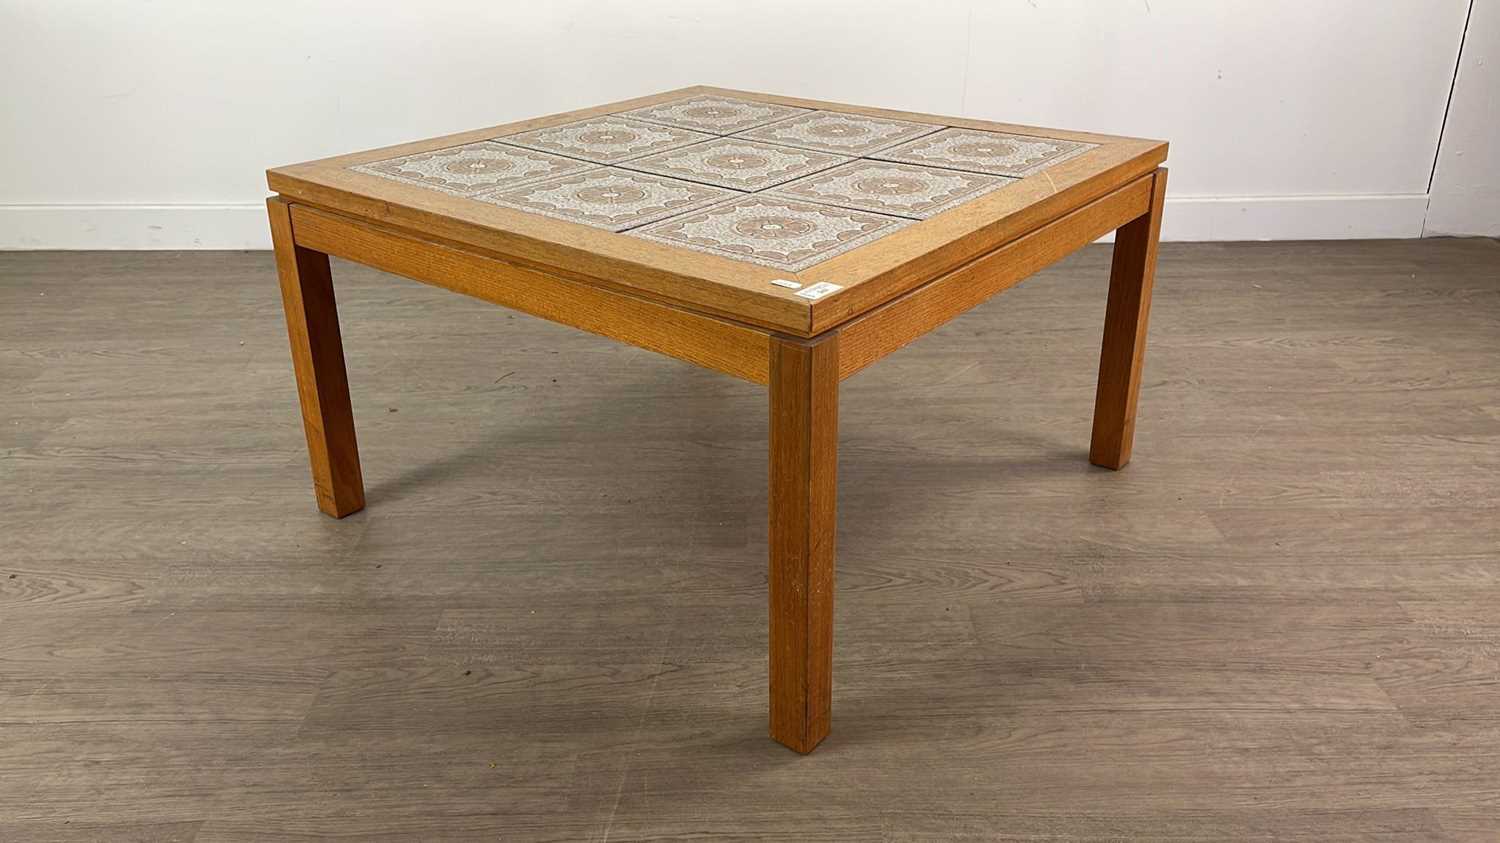 AN OAK INLAID CORNER CUPBOARD, MAHOGANY SUTHERLAND TABLE AND A TILE TOPPED COFFEE TABLE - Image 4 of 4